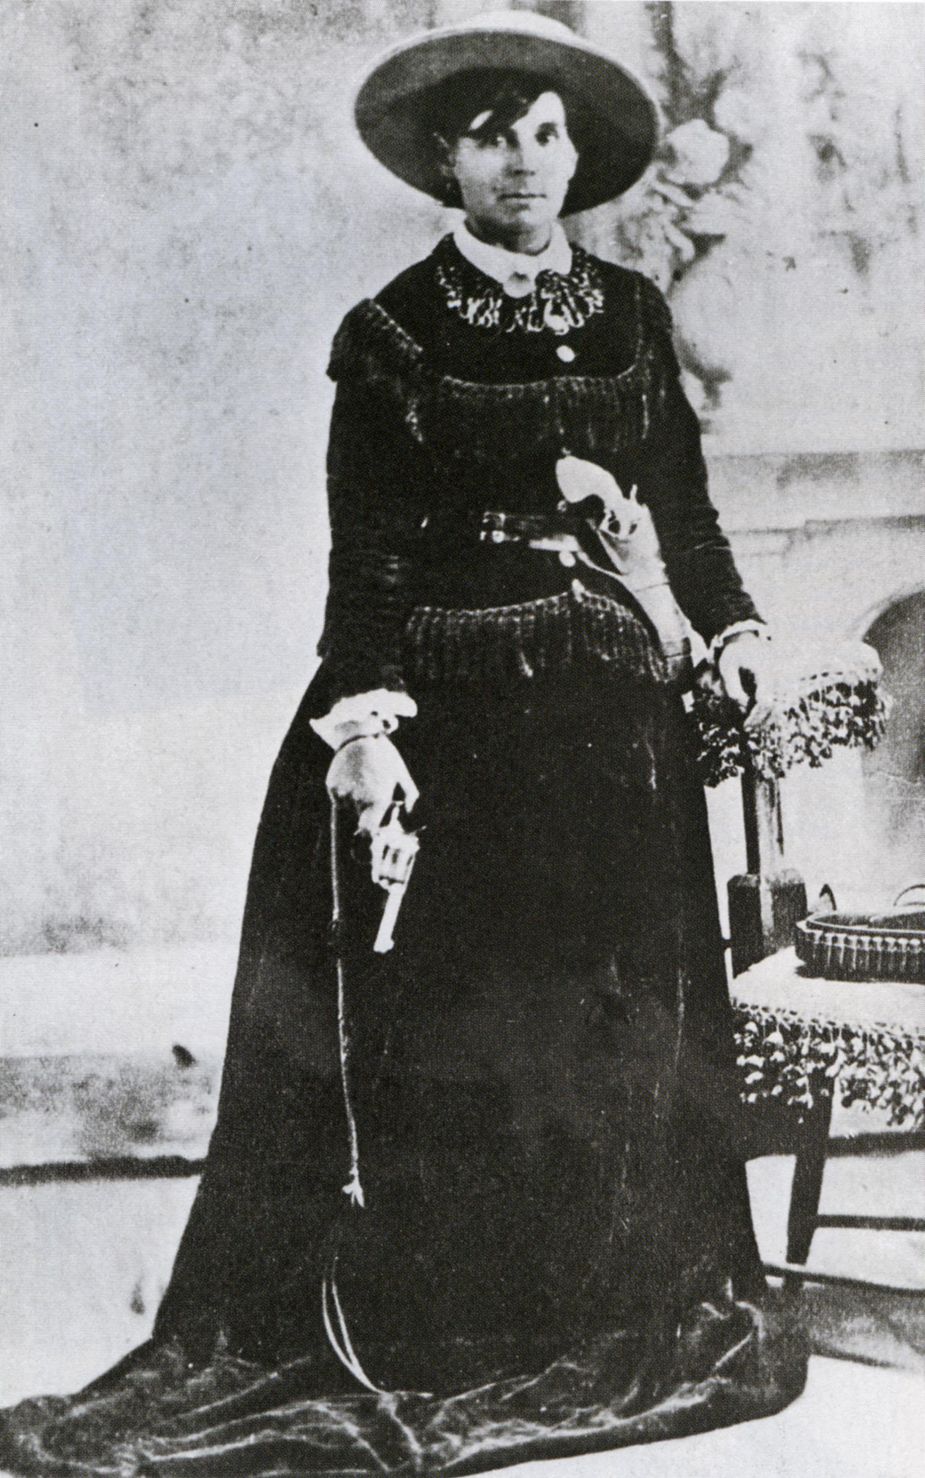 Belle Starr was famous for carrying a pair of revolvers. She was buried with one, though it was stolen by grave robbers. It eventually was recovered and now is on display at the Three Rivers Museum in Muskogee.